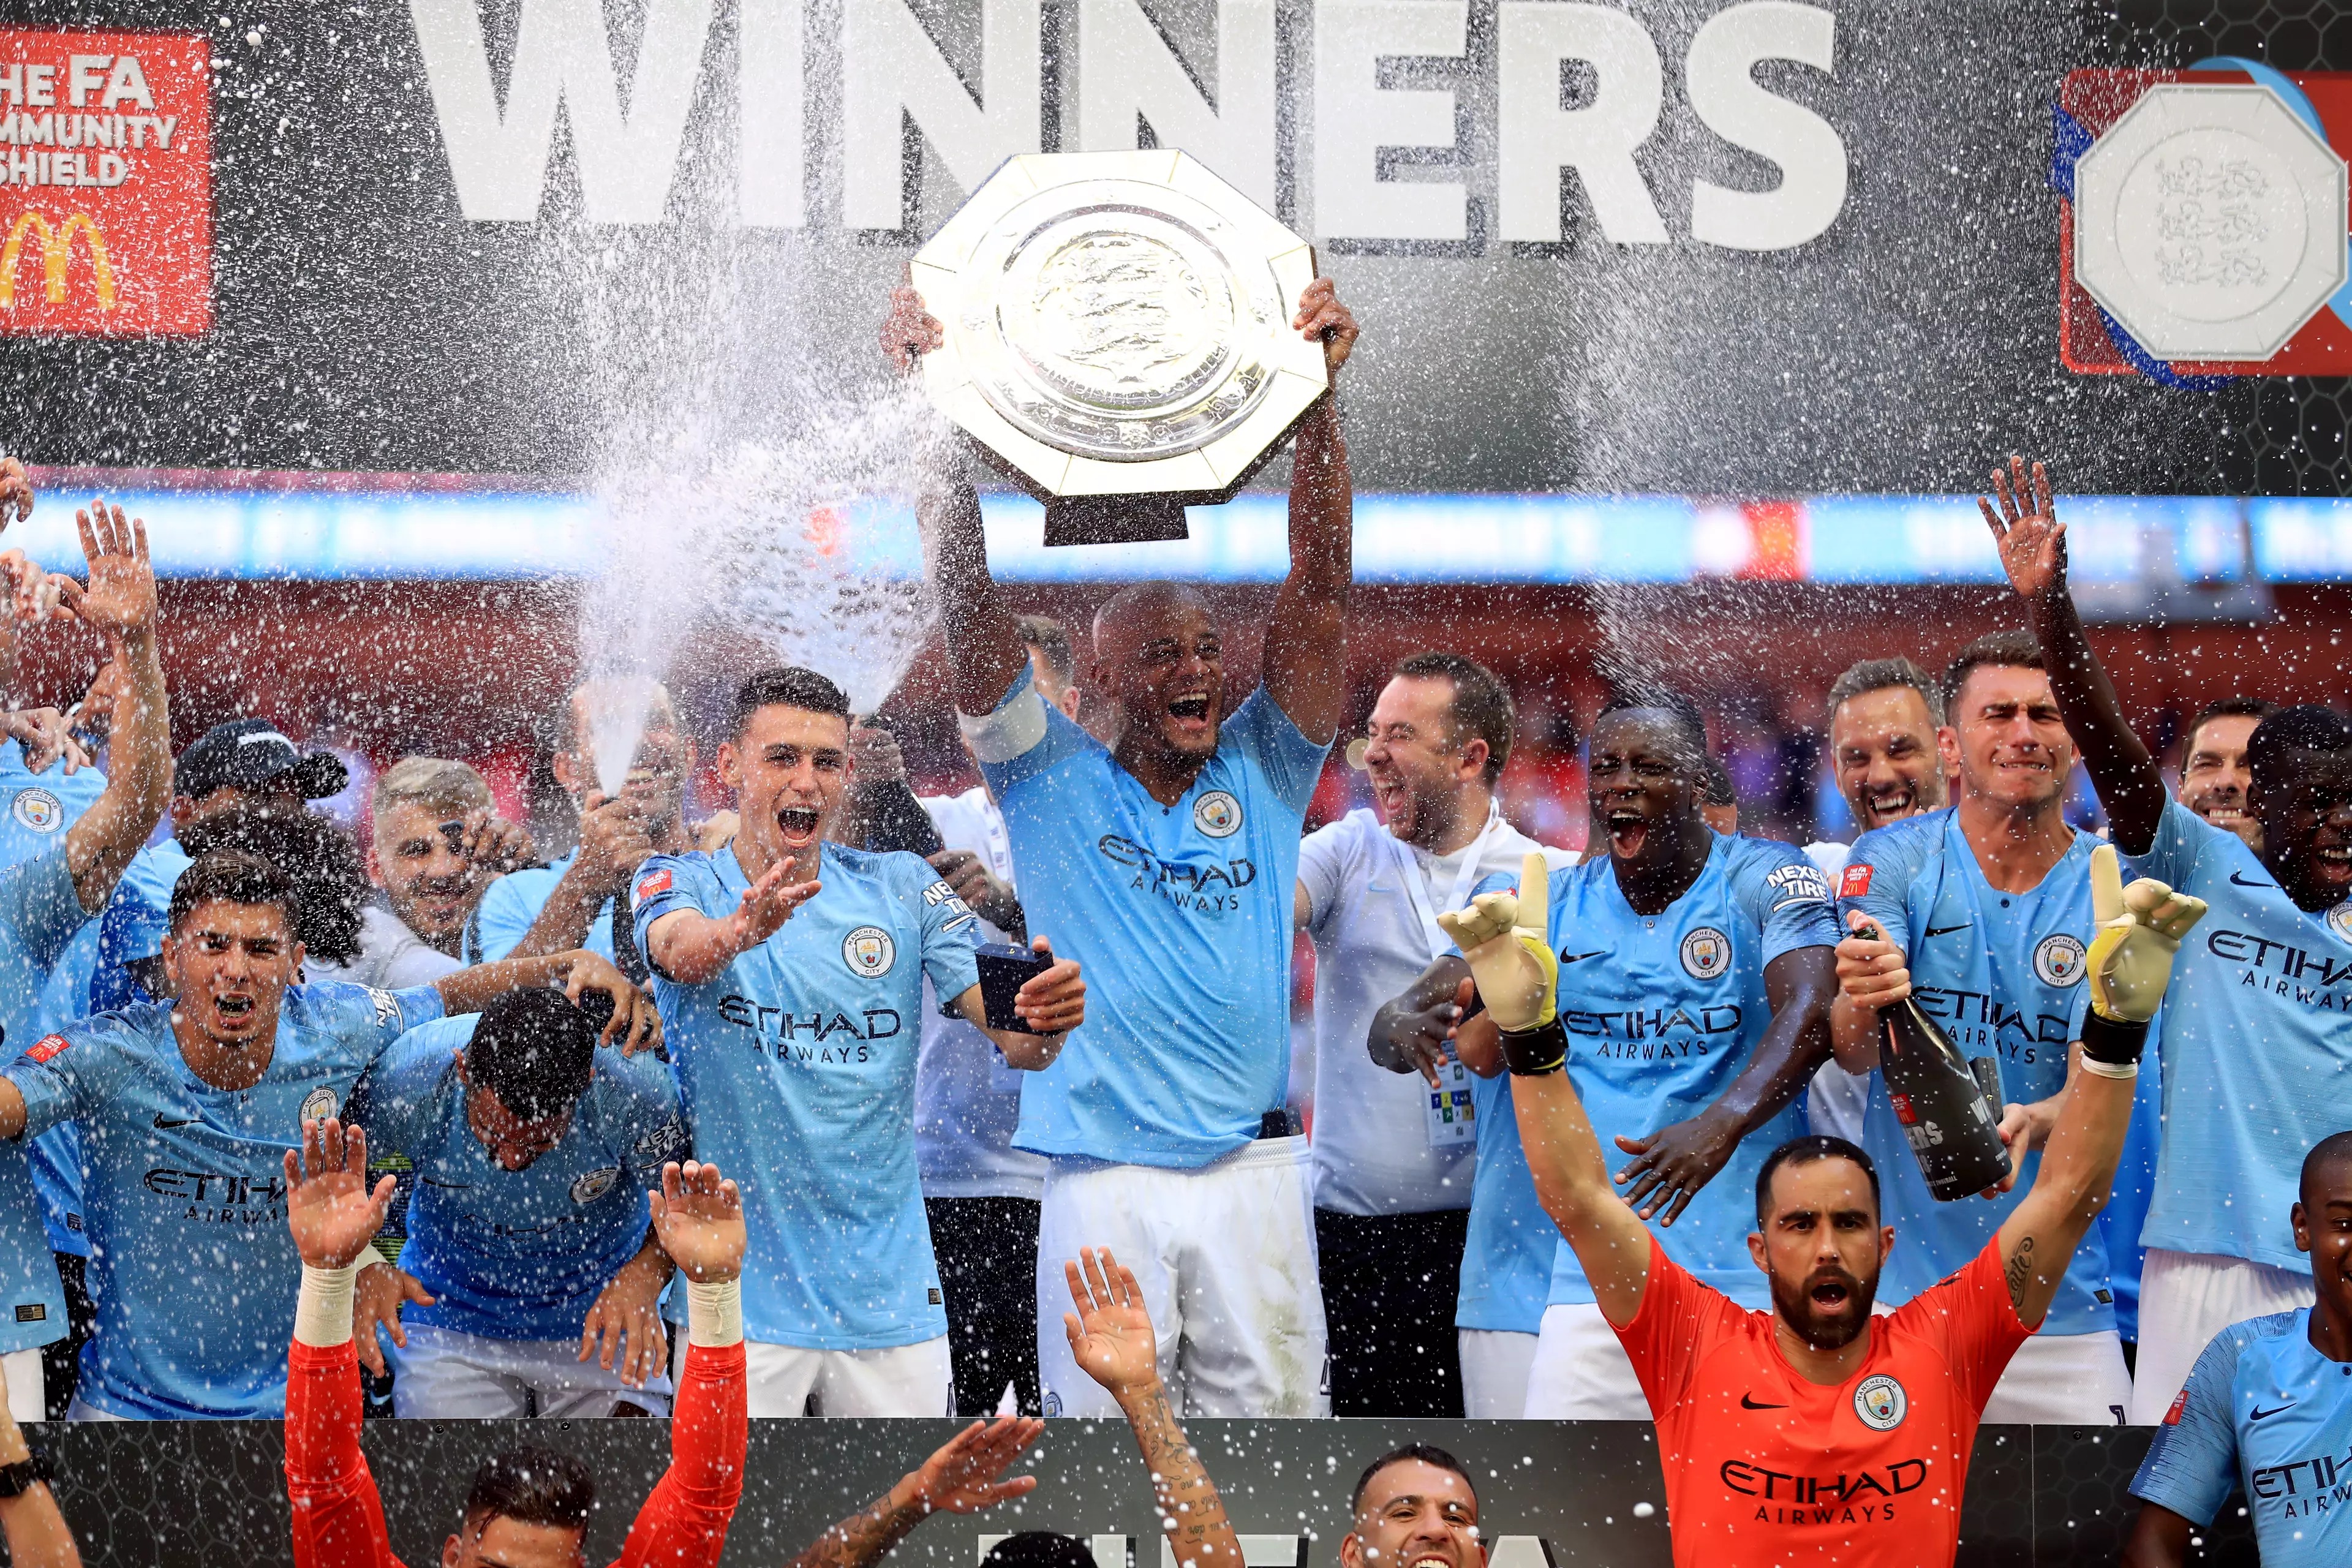 City have already added to their trophy haul with the Community Shield. Image: PA Images